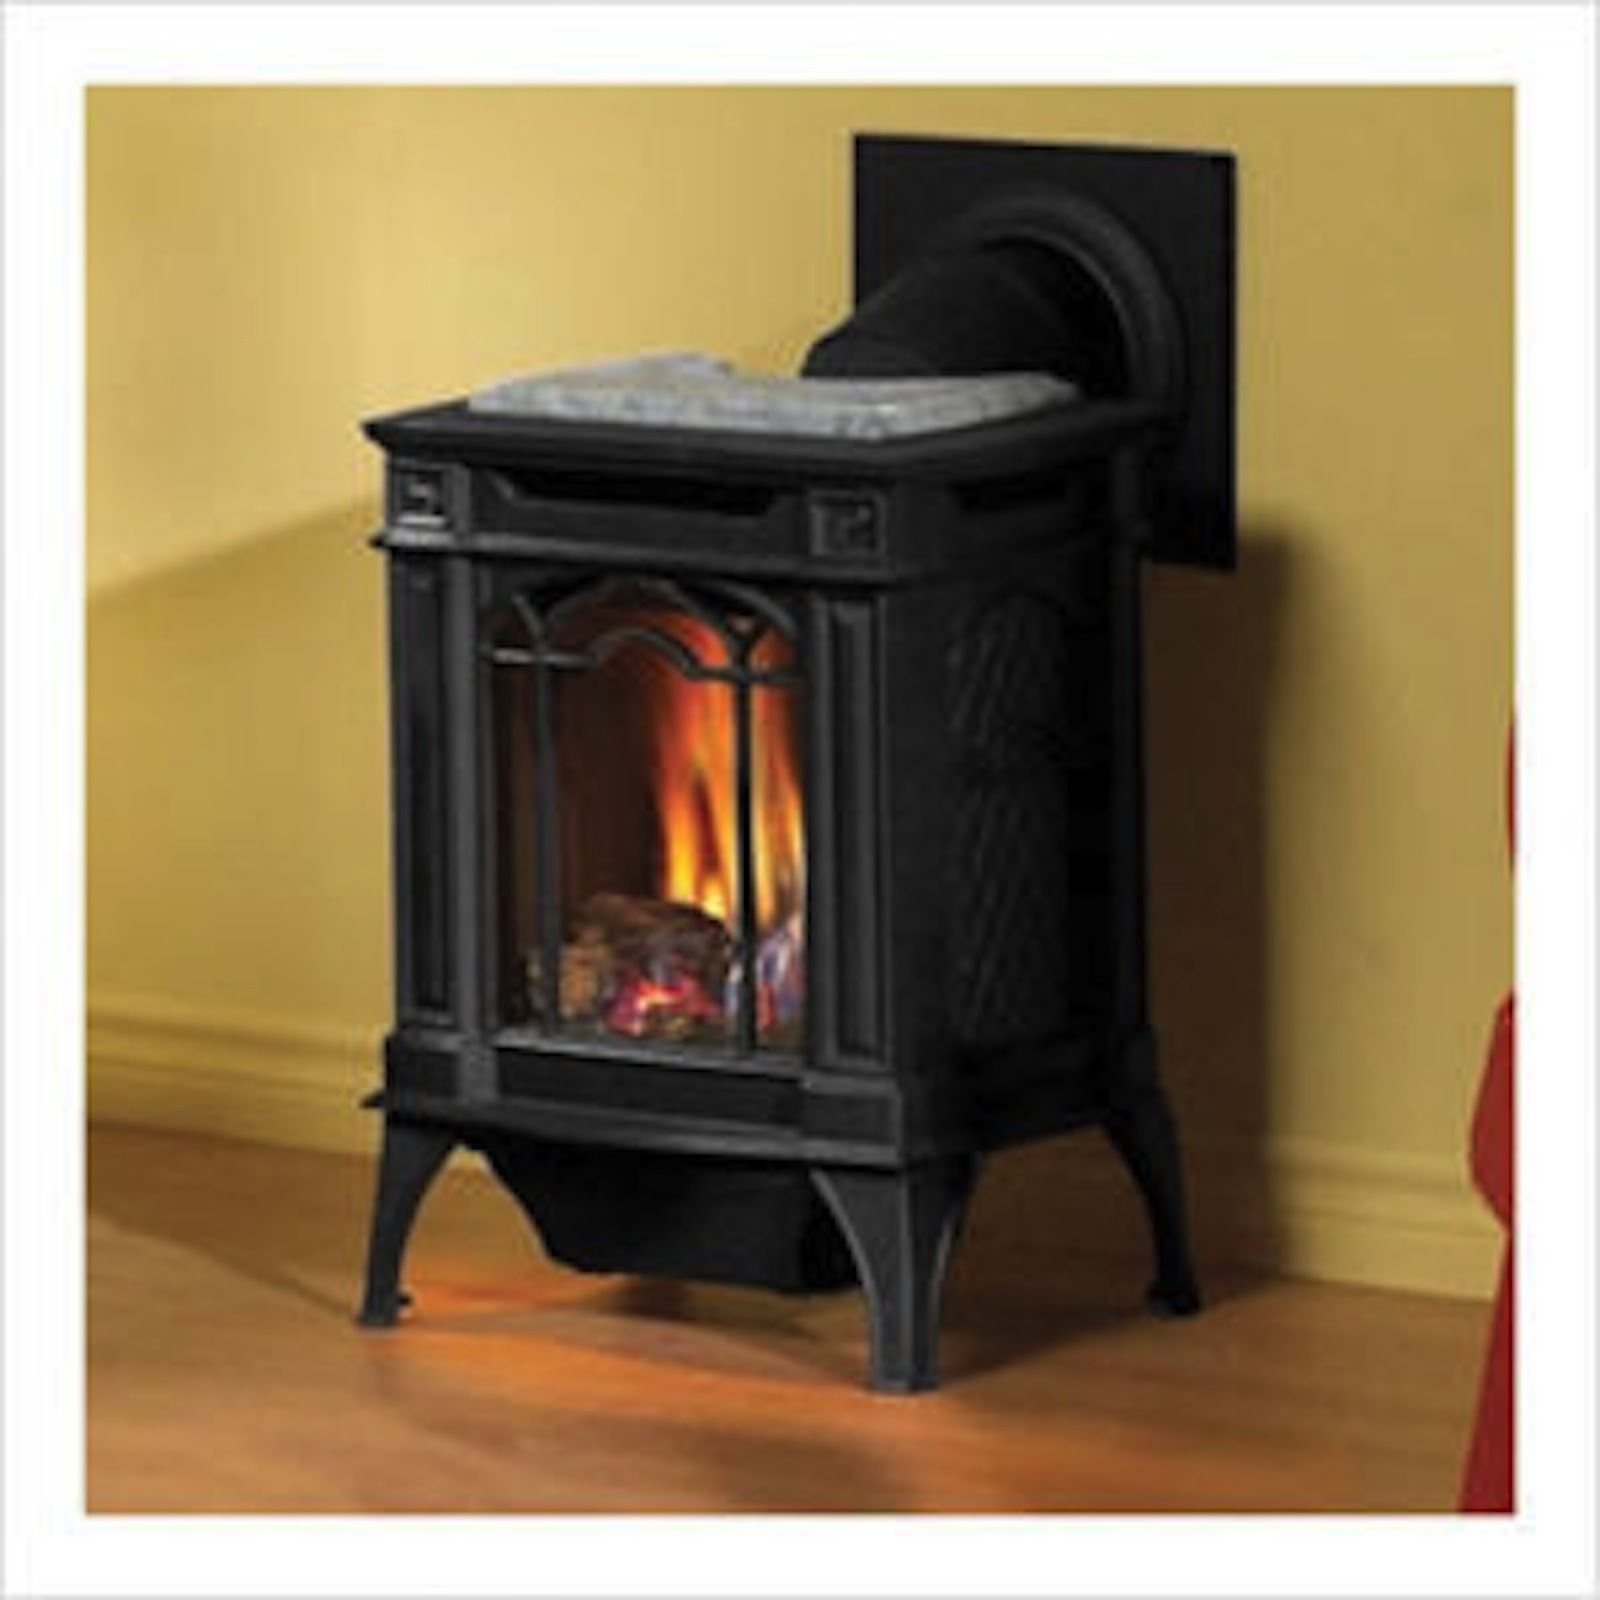 Majestic Electric Fireplace Best Of Propane Fireplace Problems with Propane Fireplace